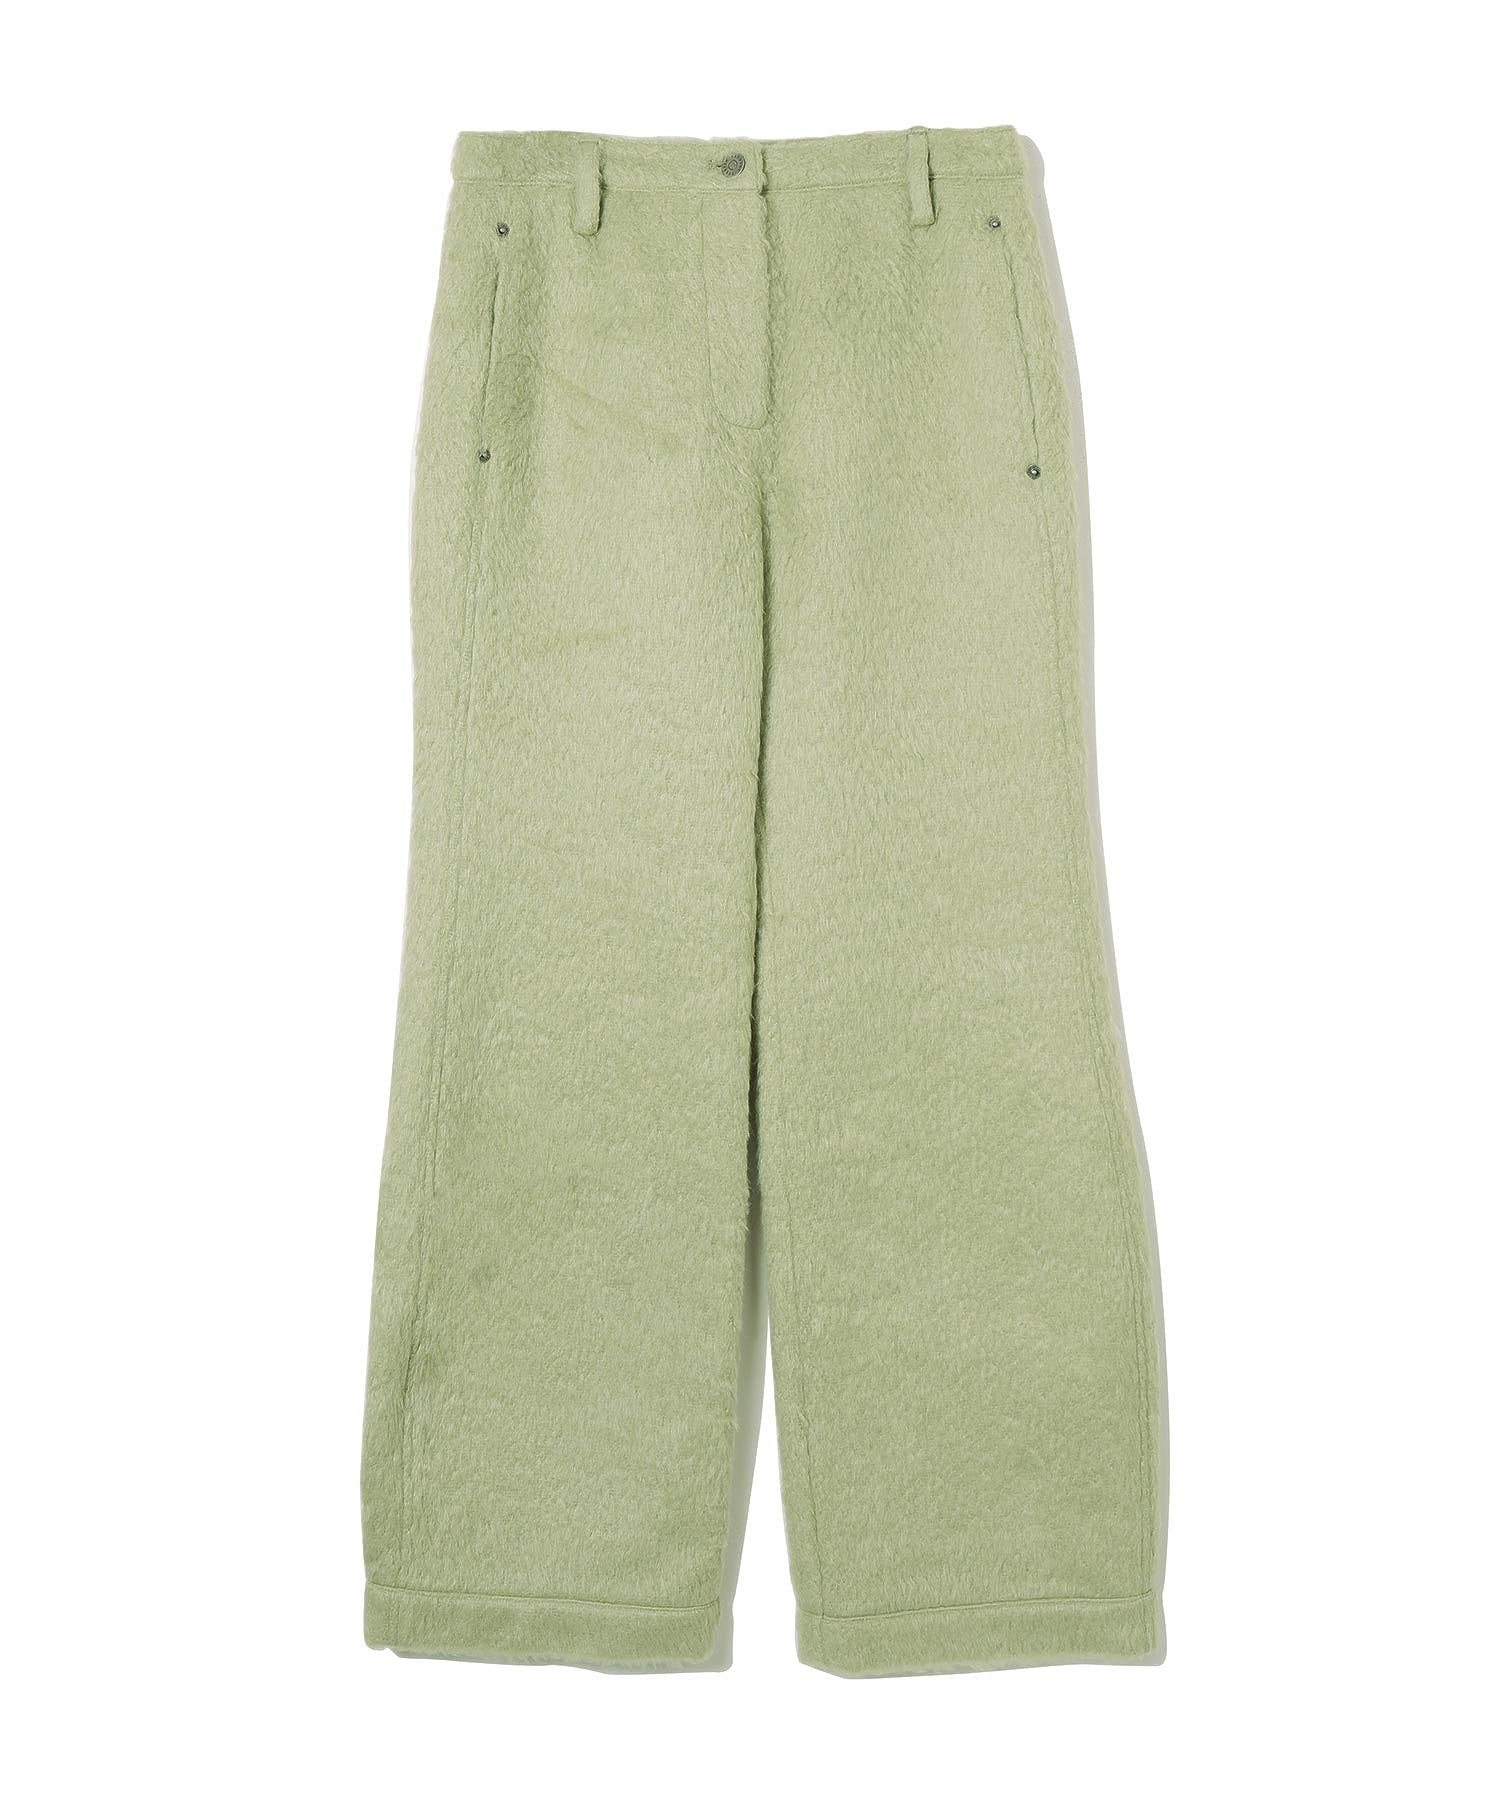 THE OPEN PRODUCT /ザオープンプロダクト/ ALPACA BLEND ROUNDING PANTS/GTO224PT002